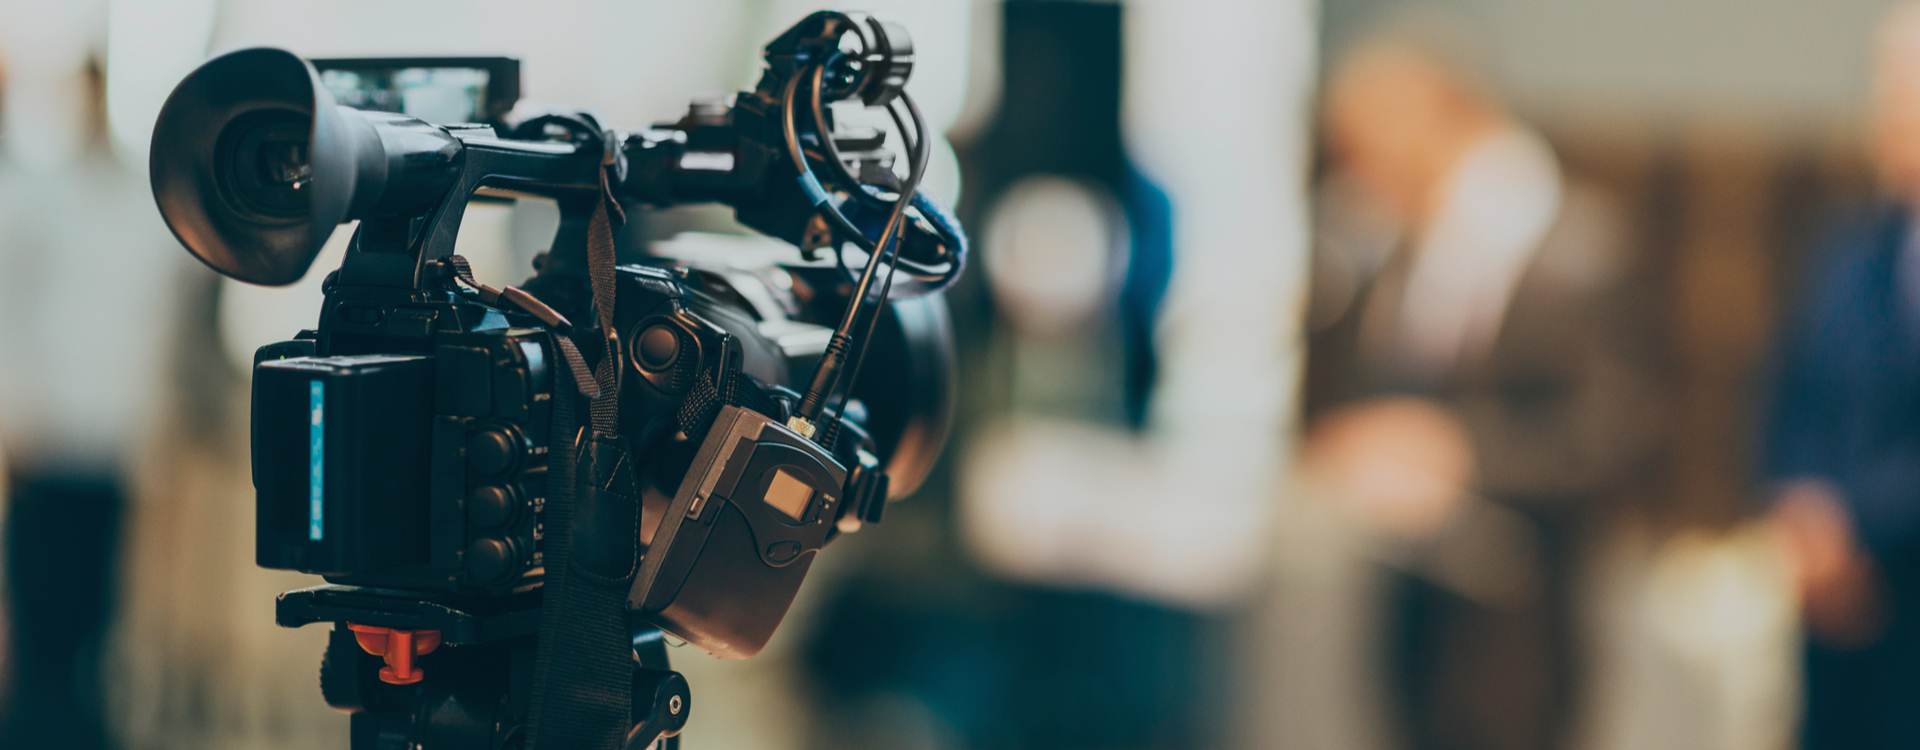 3 Ways to Use Video Marketing With Your Content